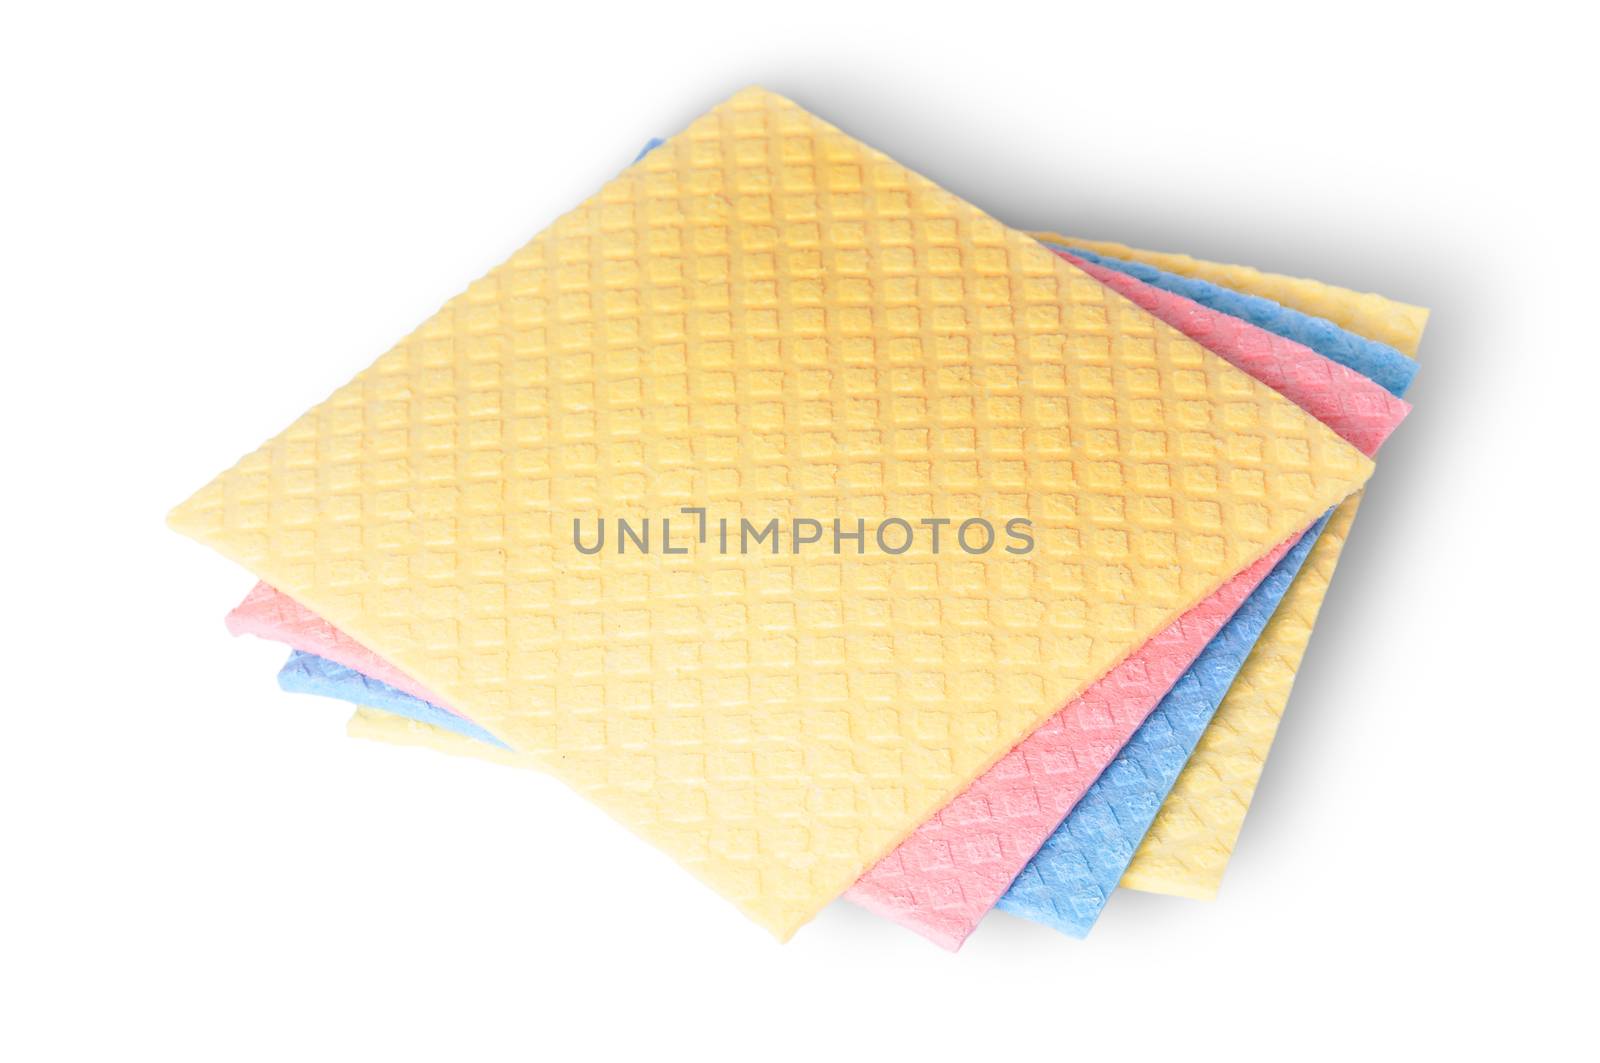 On top multicolored sponges for dishwashing by Cipariss